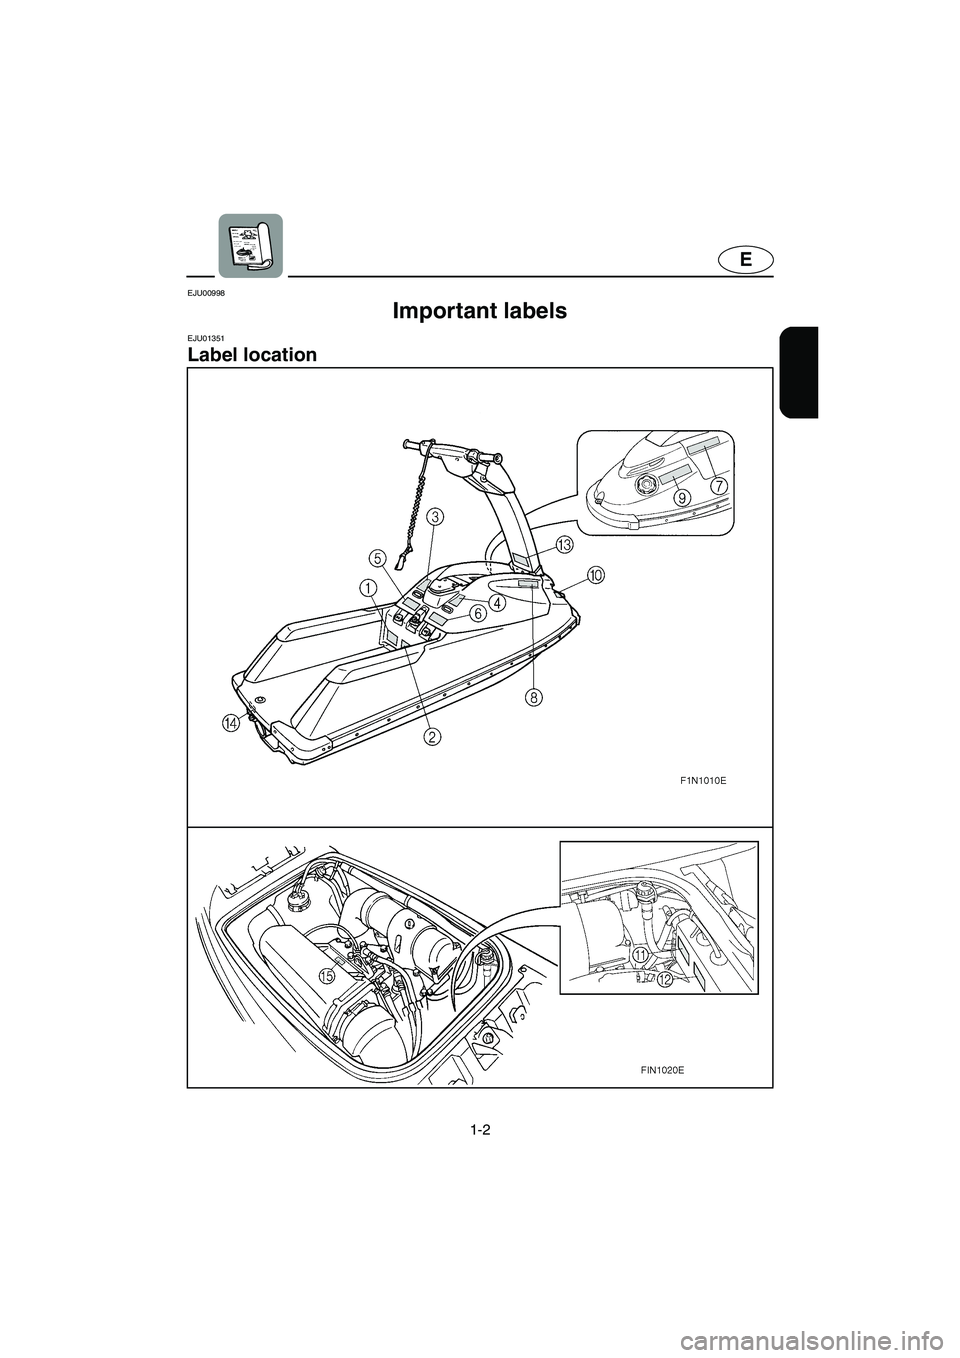 YAMAHA SUPERJET 2003  Owners Manual 1-2
E
EJU00998 
Important labels 
EJU01351 
Label location 
UF1N71.book  Page 2  Tuesday, June 4, 2002  3:34 PM 